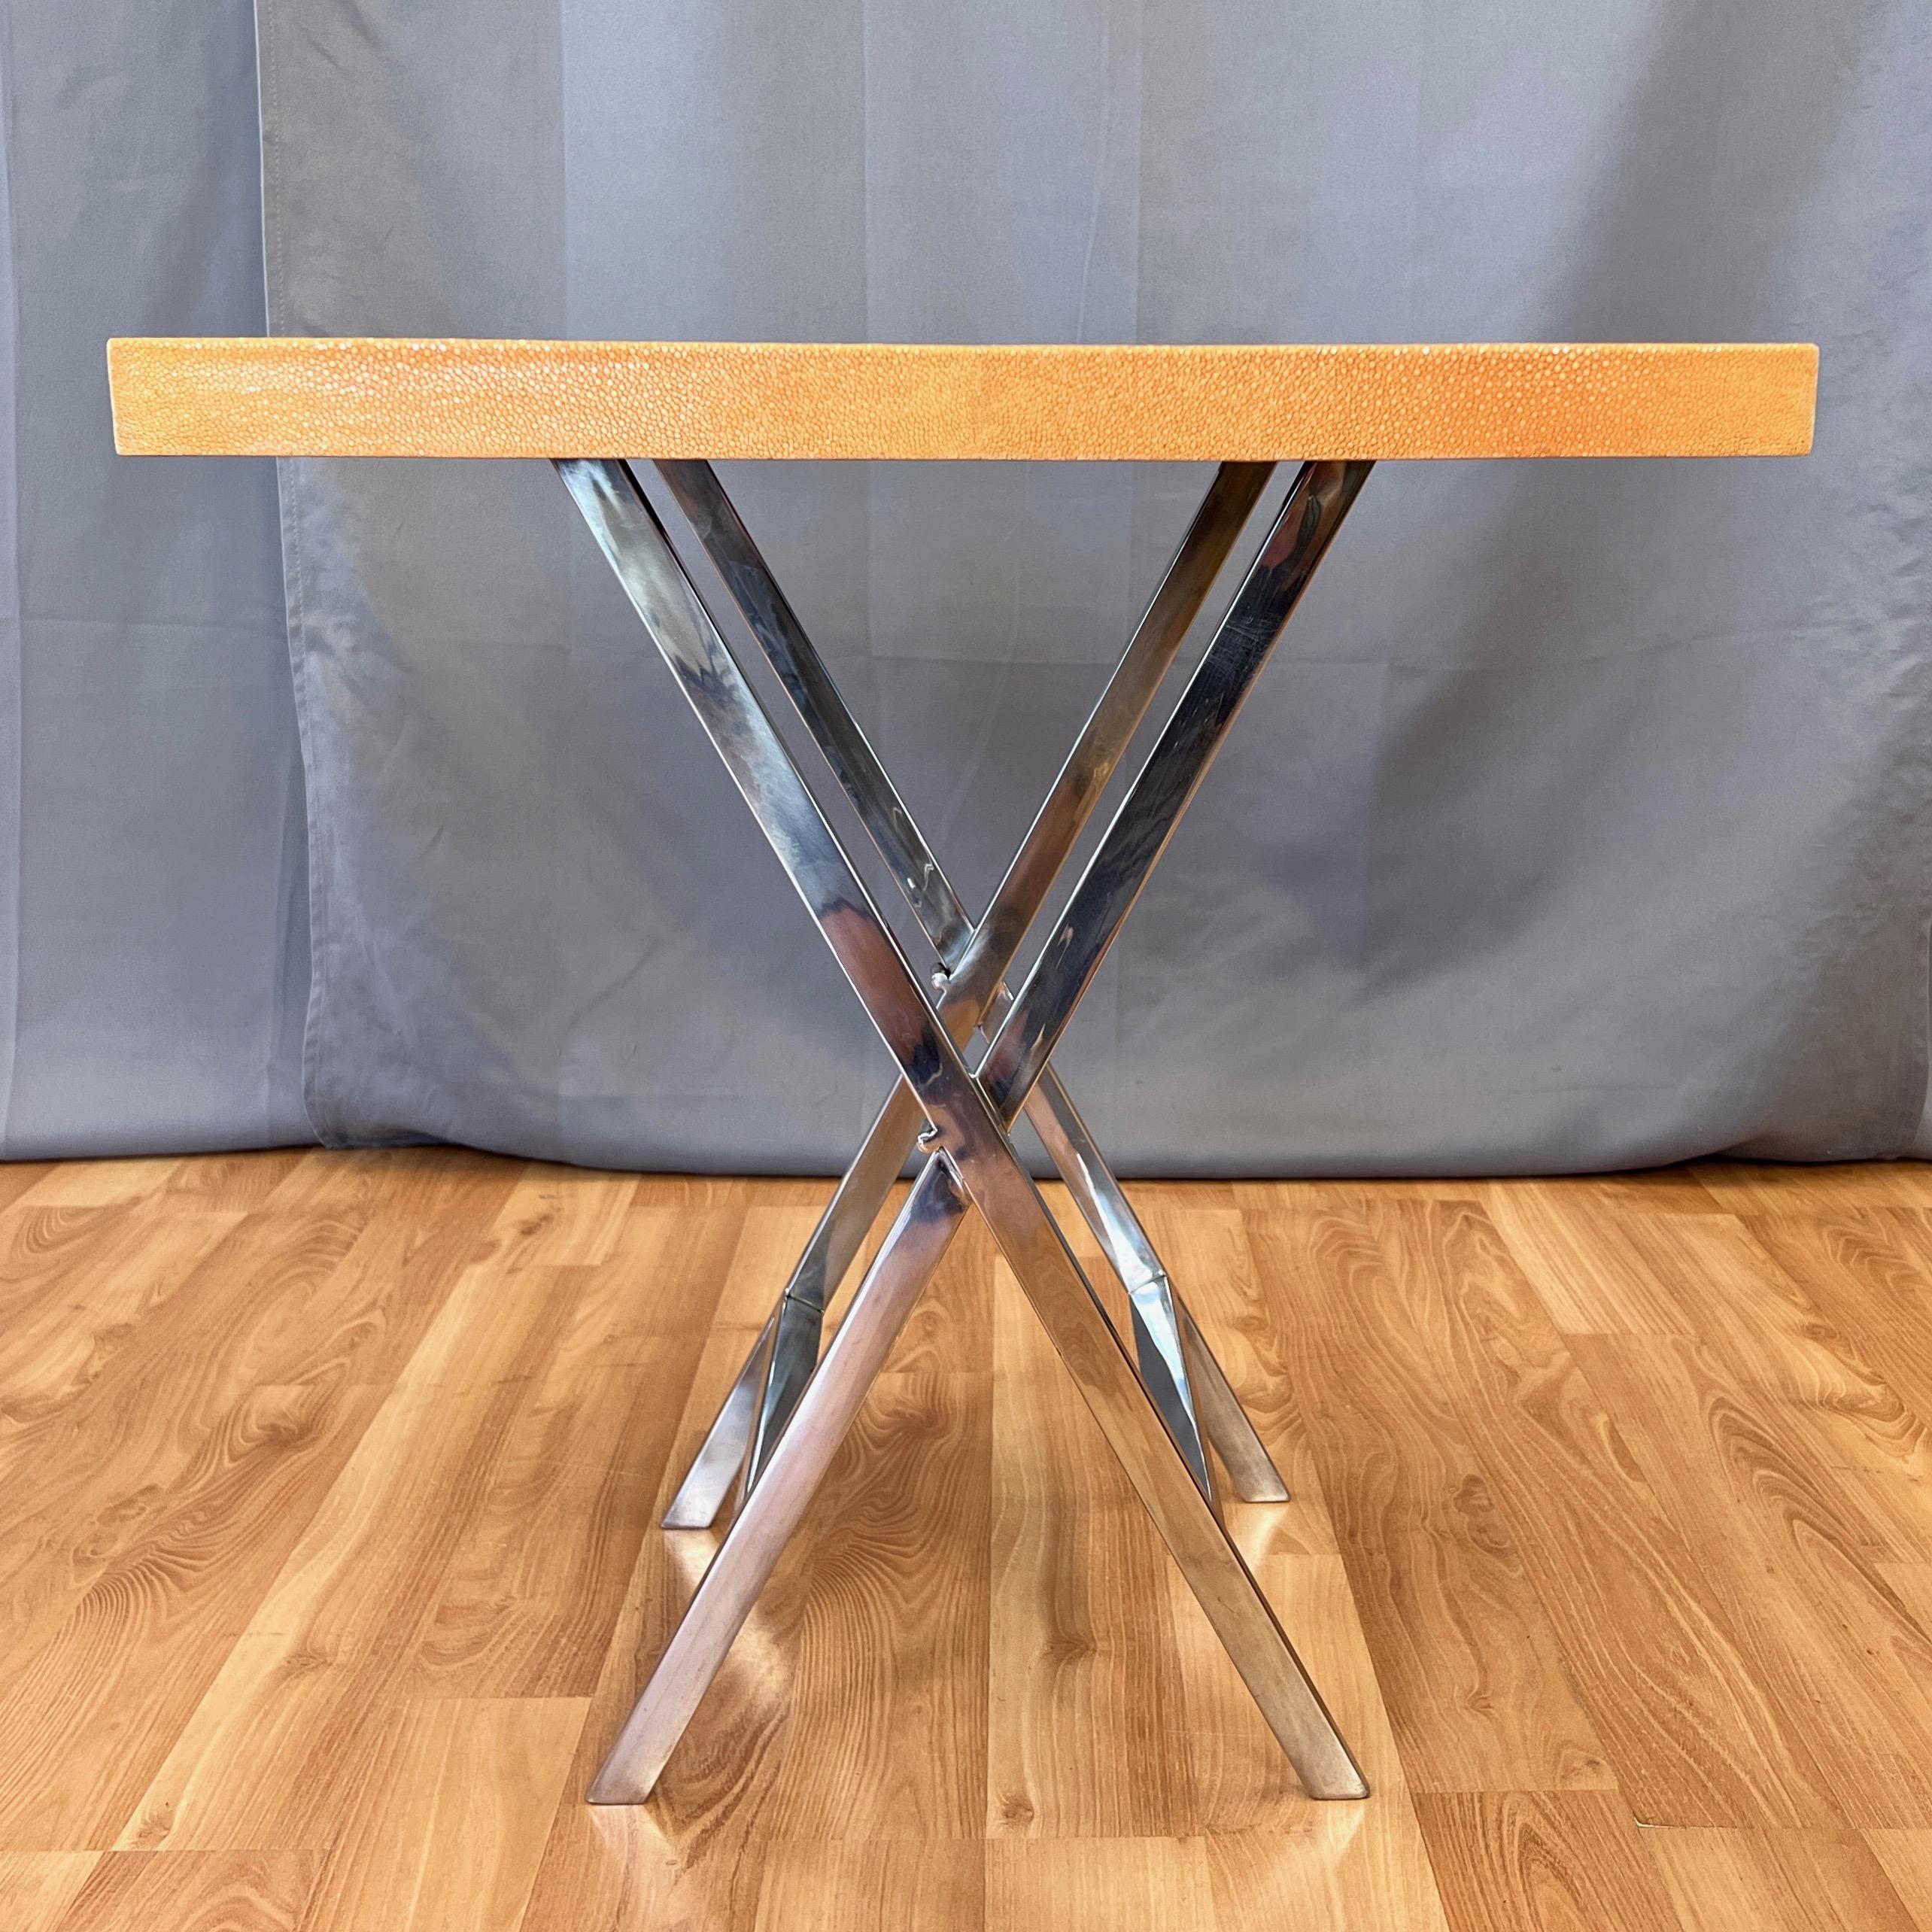 Plated Orange Shagreen Campaign Side Table with Polished Nickel X-Base, circa 1980 For Sale